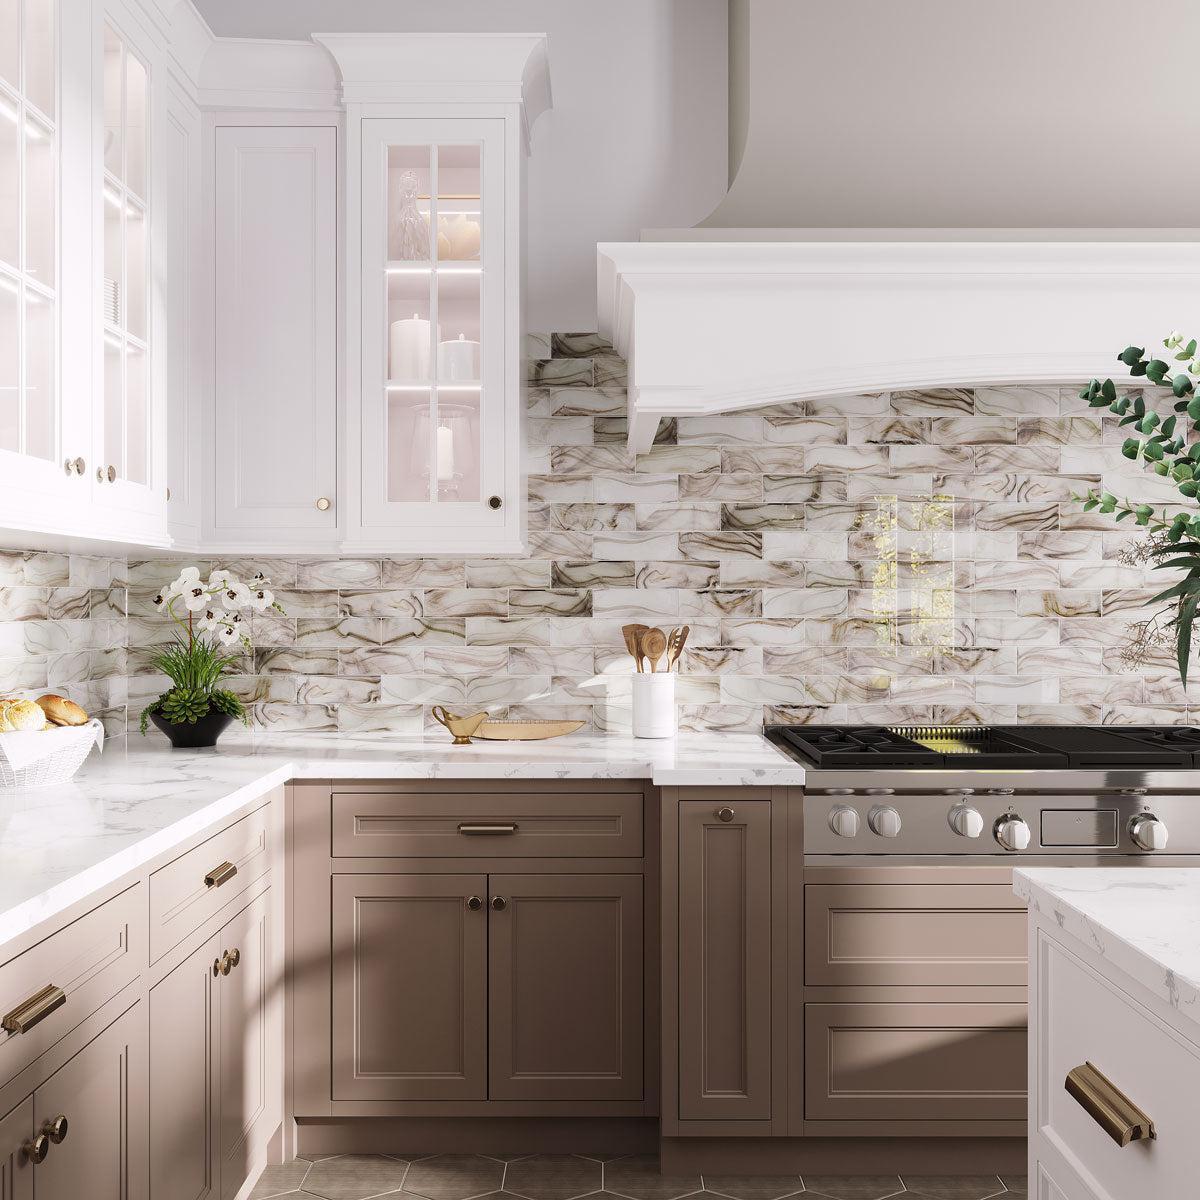 White and beige kitchen with handpoured artisan glass subway tiles